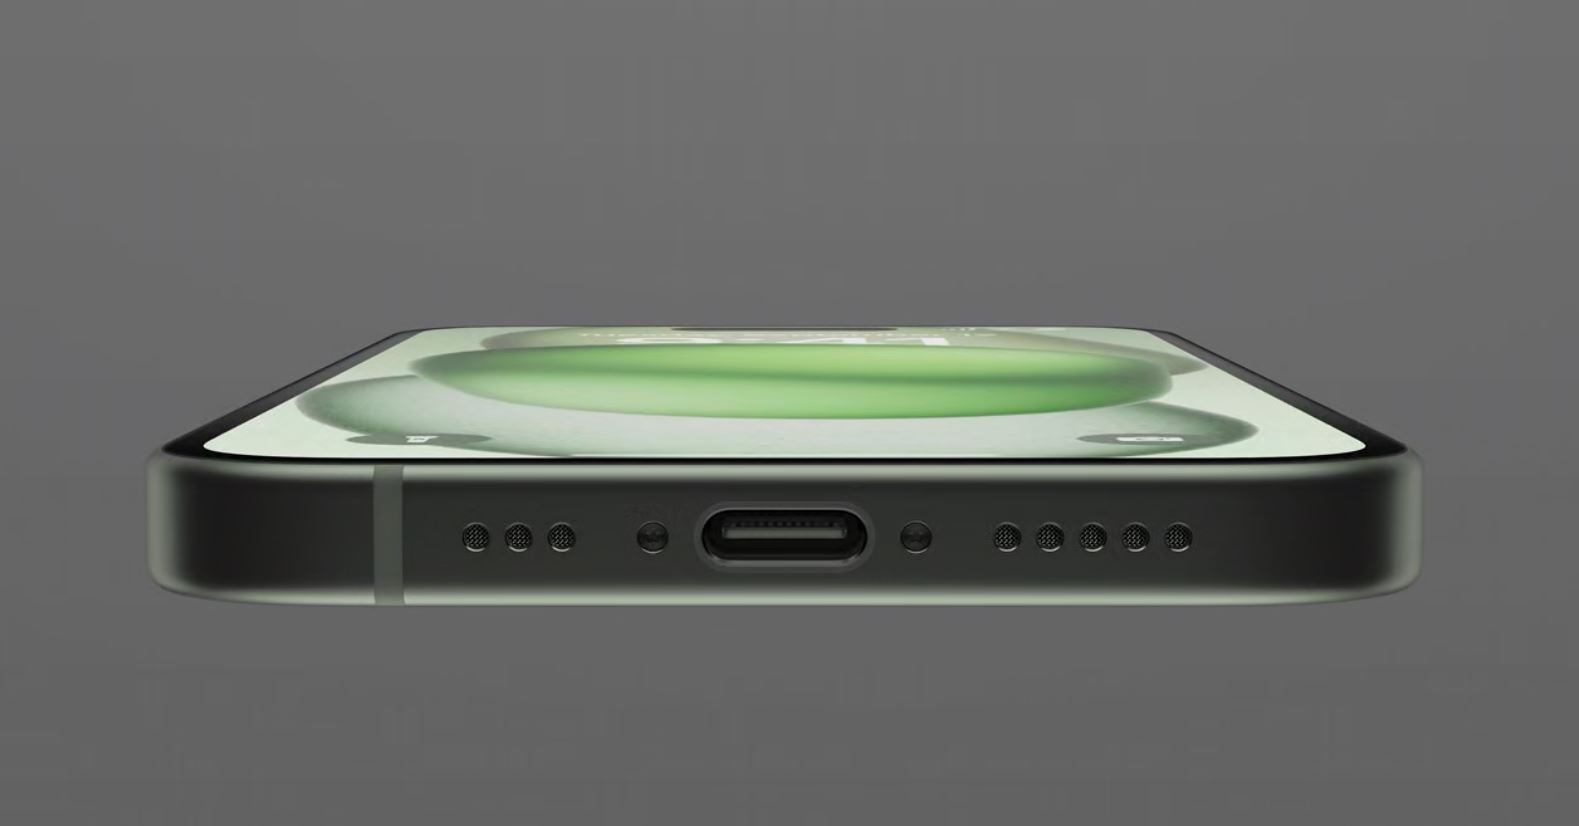 The iPhone 15 series will feature a USB-C charging port for the first time